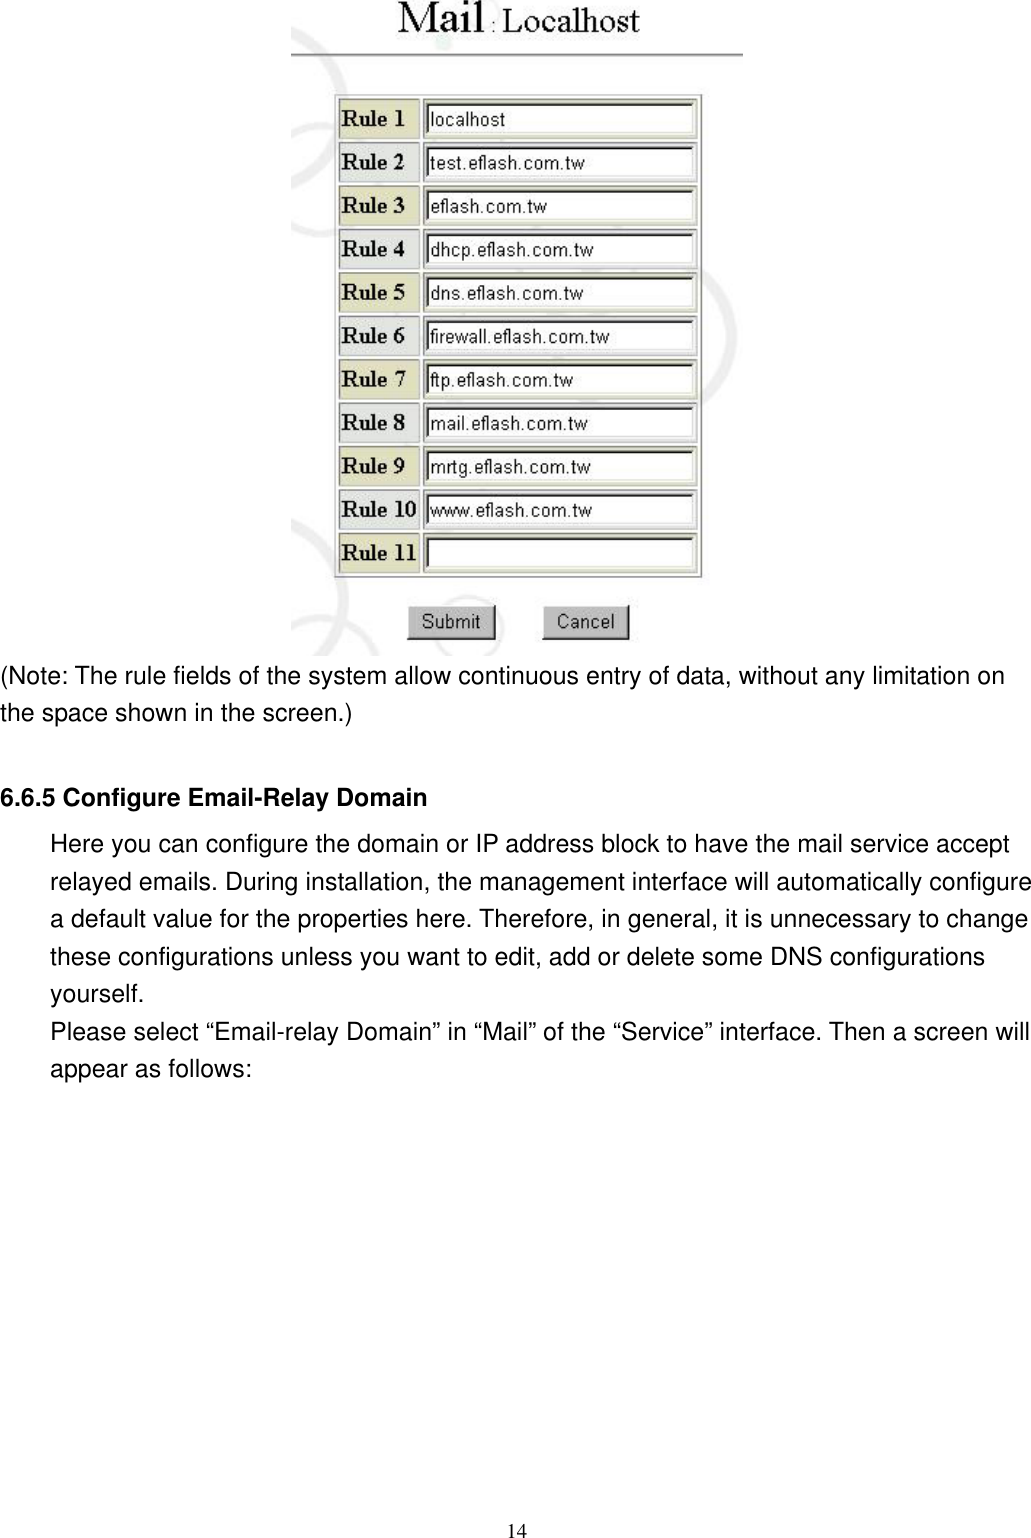  14 (Note: The rule fields of the system allow continuous entry of data, without any limitation on the space shown in the screen.)  6.6.5 Configure Email-Relay Domain Here you can configure the domain or IP address block to have the mail service accept relayed emails. During installation, the management interface will automatically configure a default value for the properties here. Therefore, in general, it is unnecessary to change these configurations unless you want to edit, add or delete some DNS configurations yourself.  Please select “Email-relay Domain” in “Mail” of the “Service” interface. Then a screen will appear as follows: 